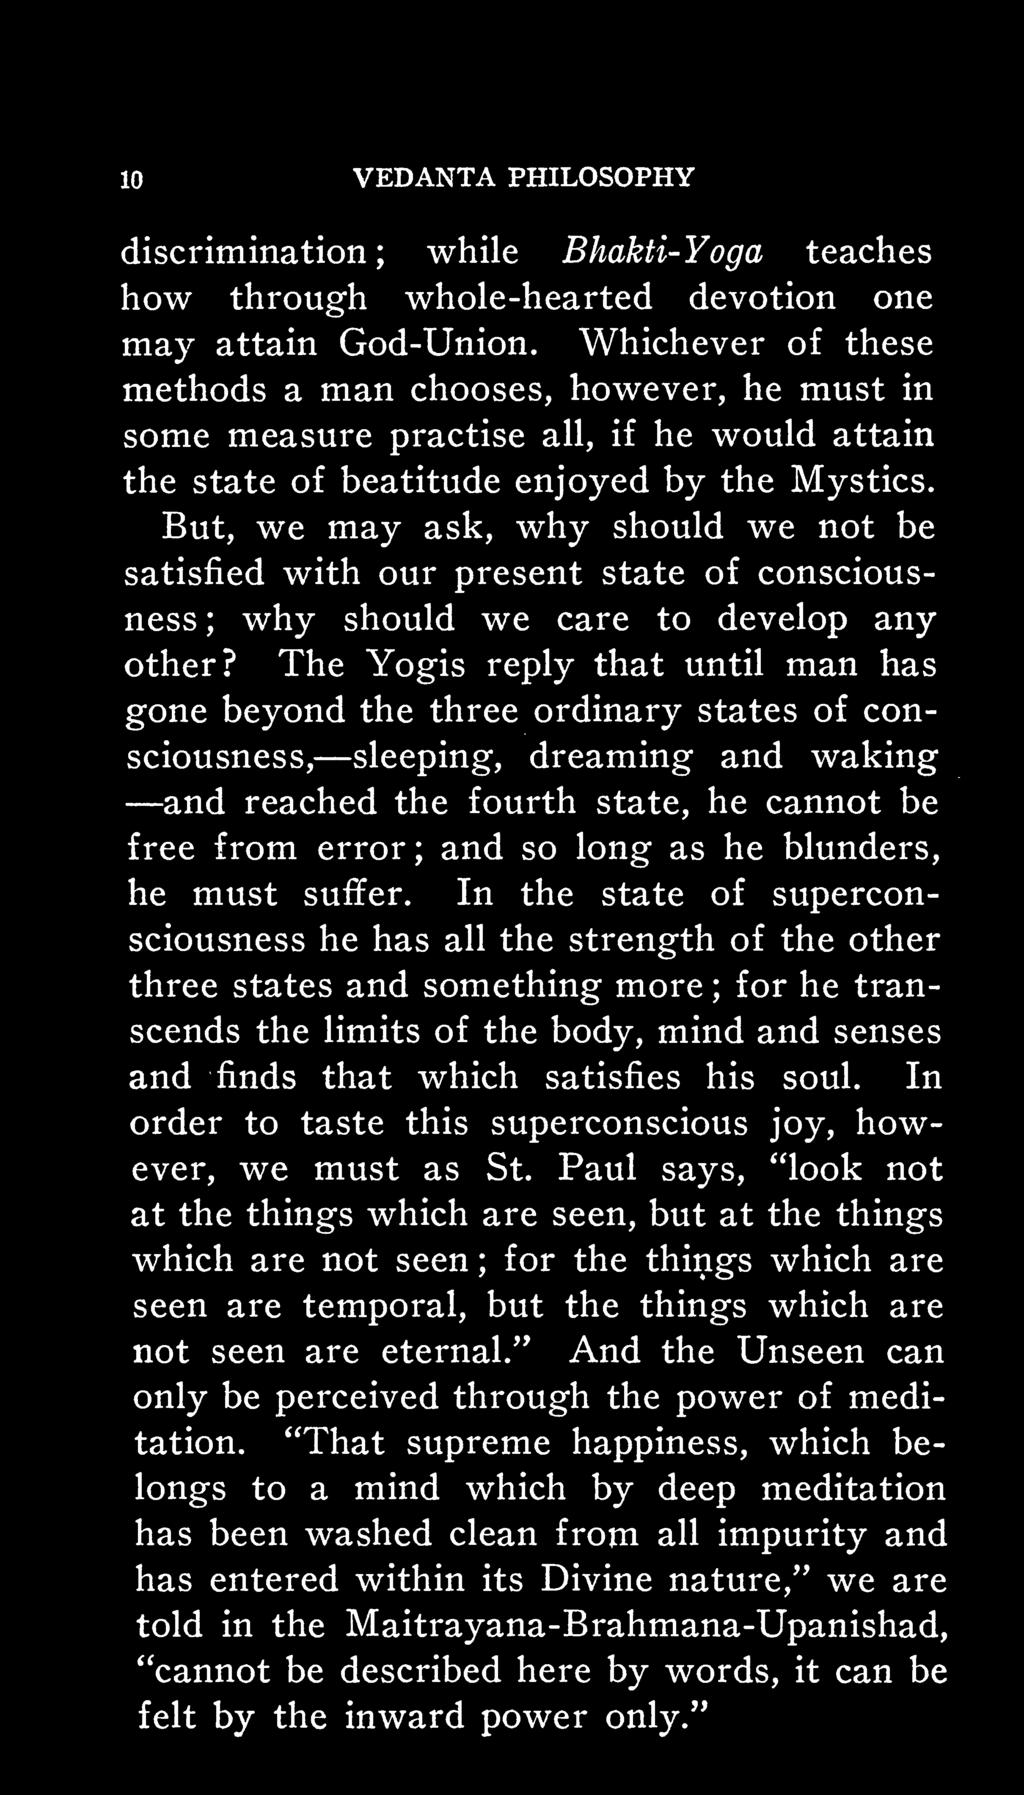 But, we may ask, why should we not be satisfied with our present state of consciousness; why should we care to develop any other?